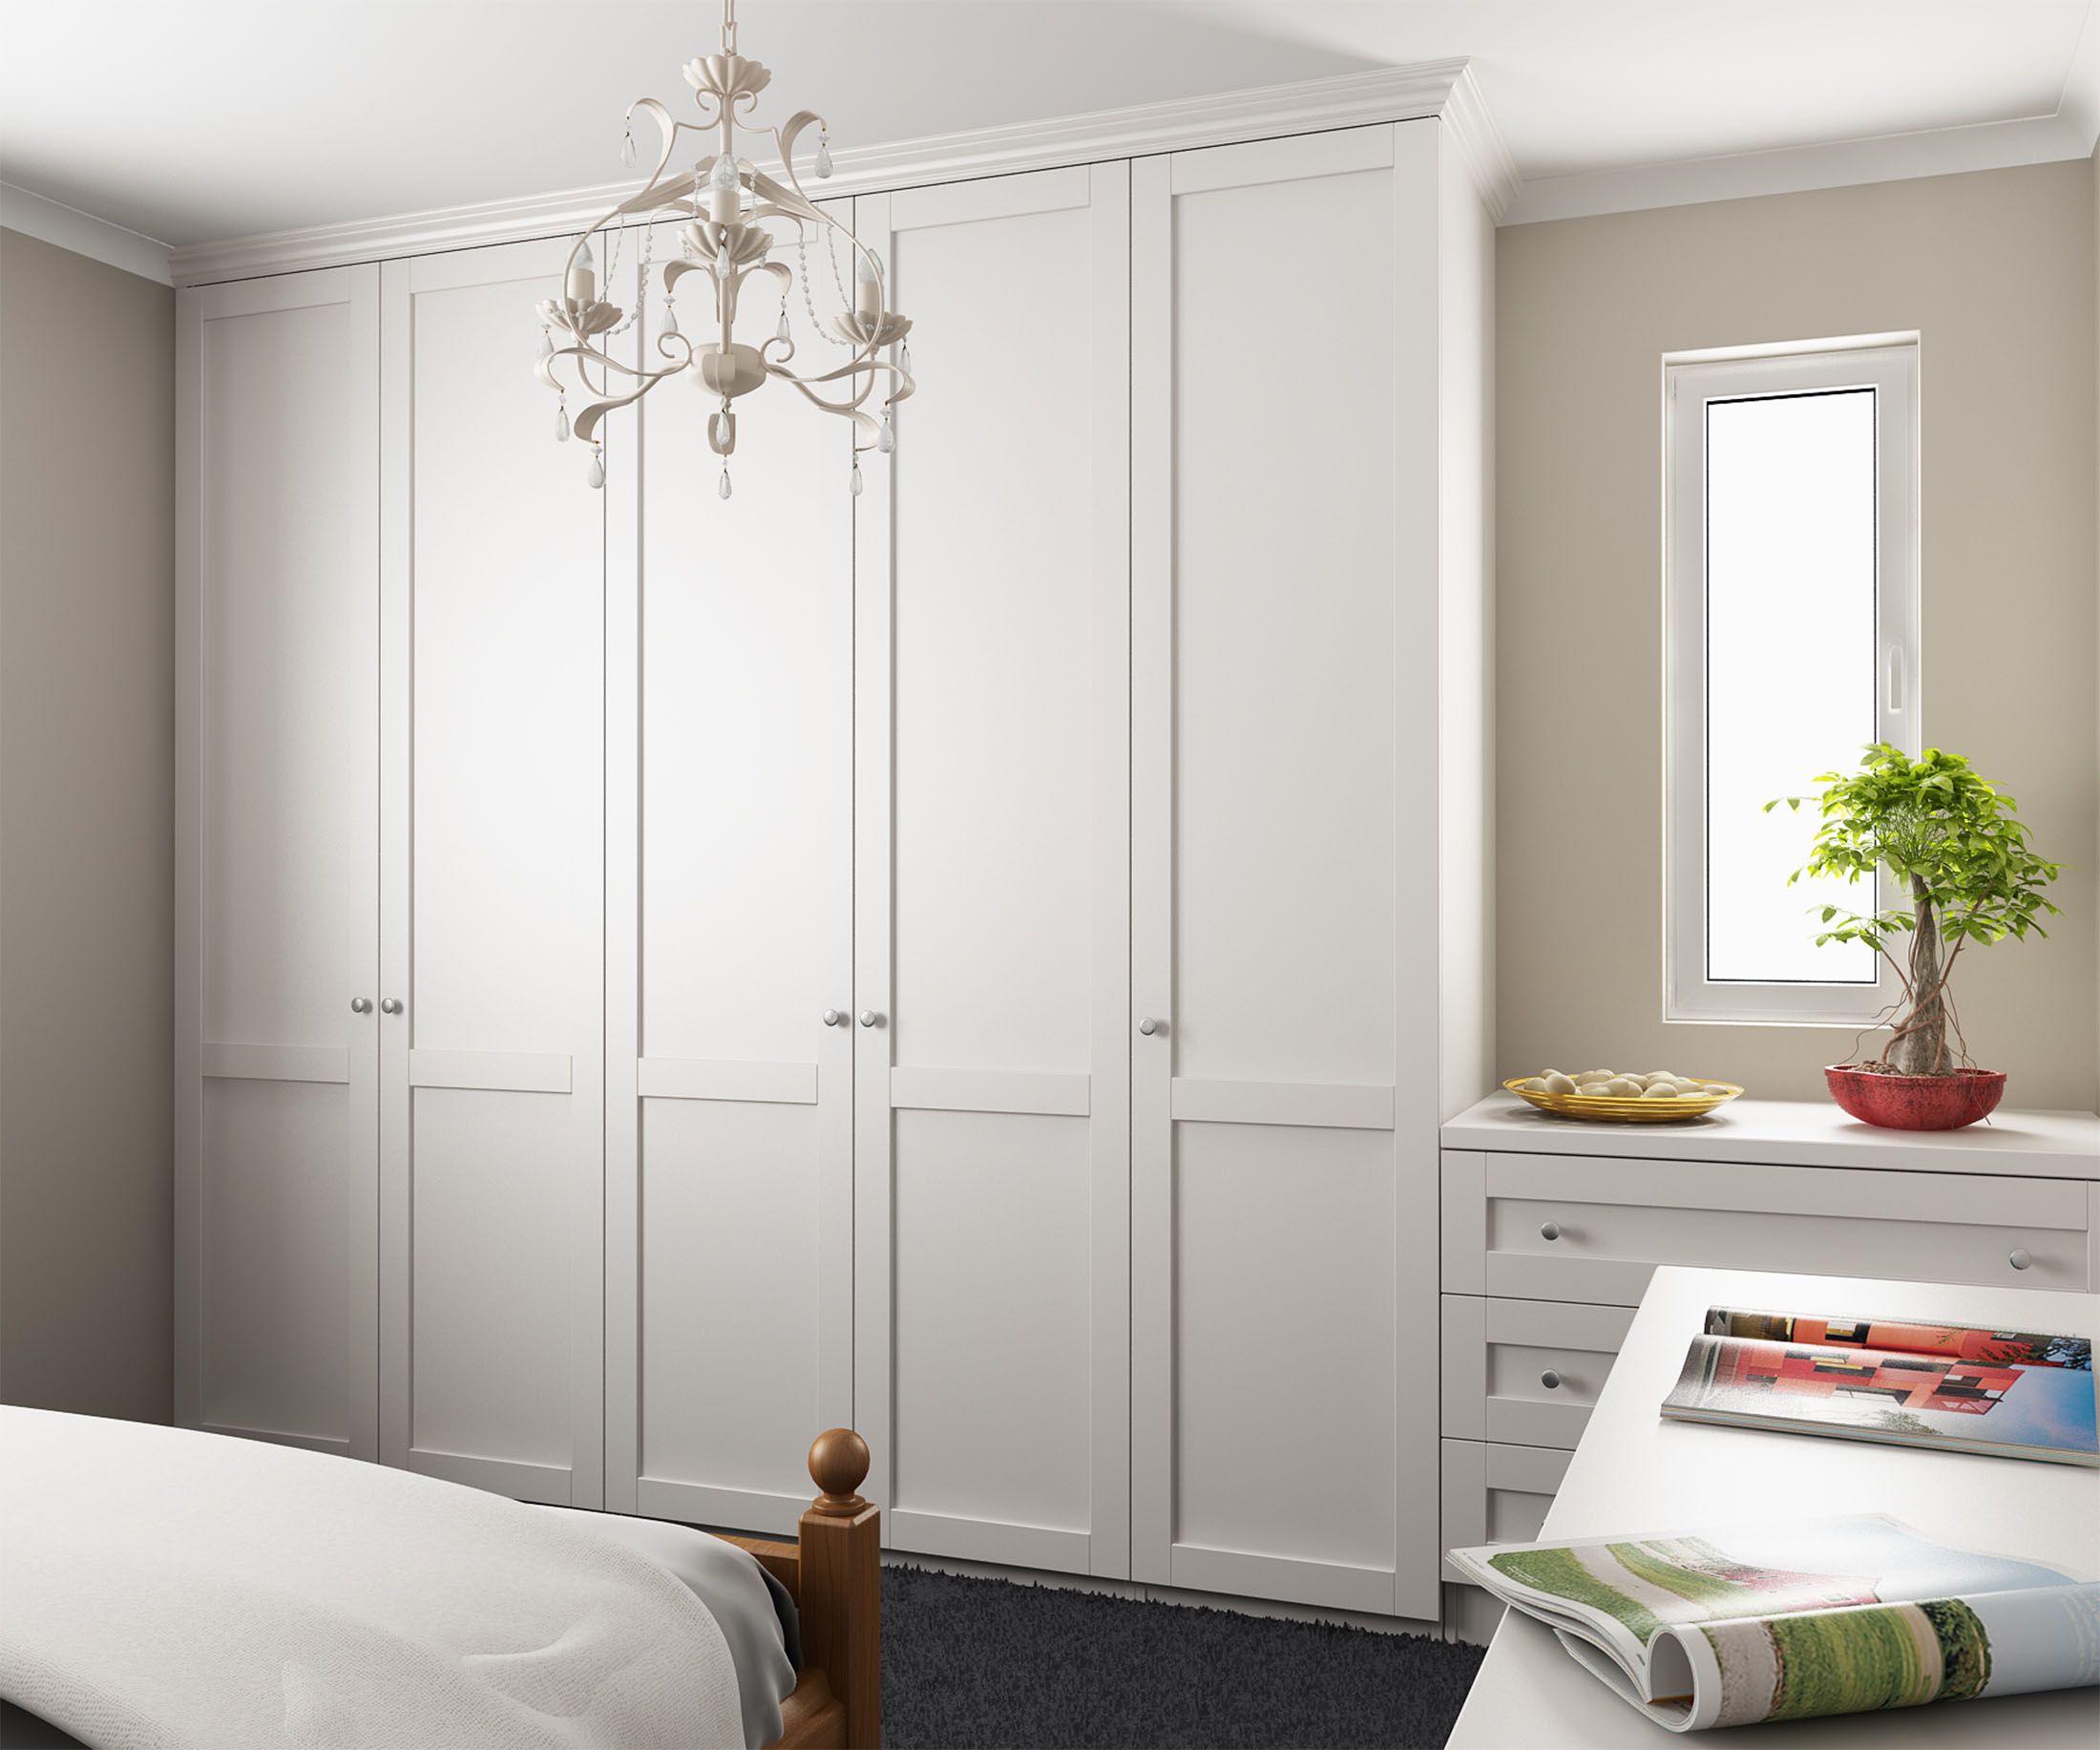 Hinged-door wardrobes pine painted white tall wardrobes along left wall, dressing table/drawers with mirror over,  betweenu2026 TUFHZKX